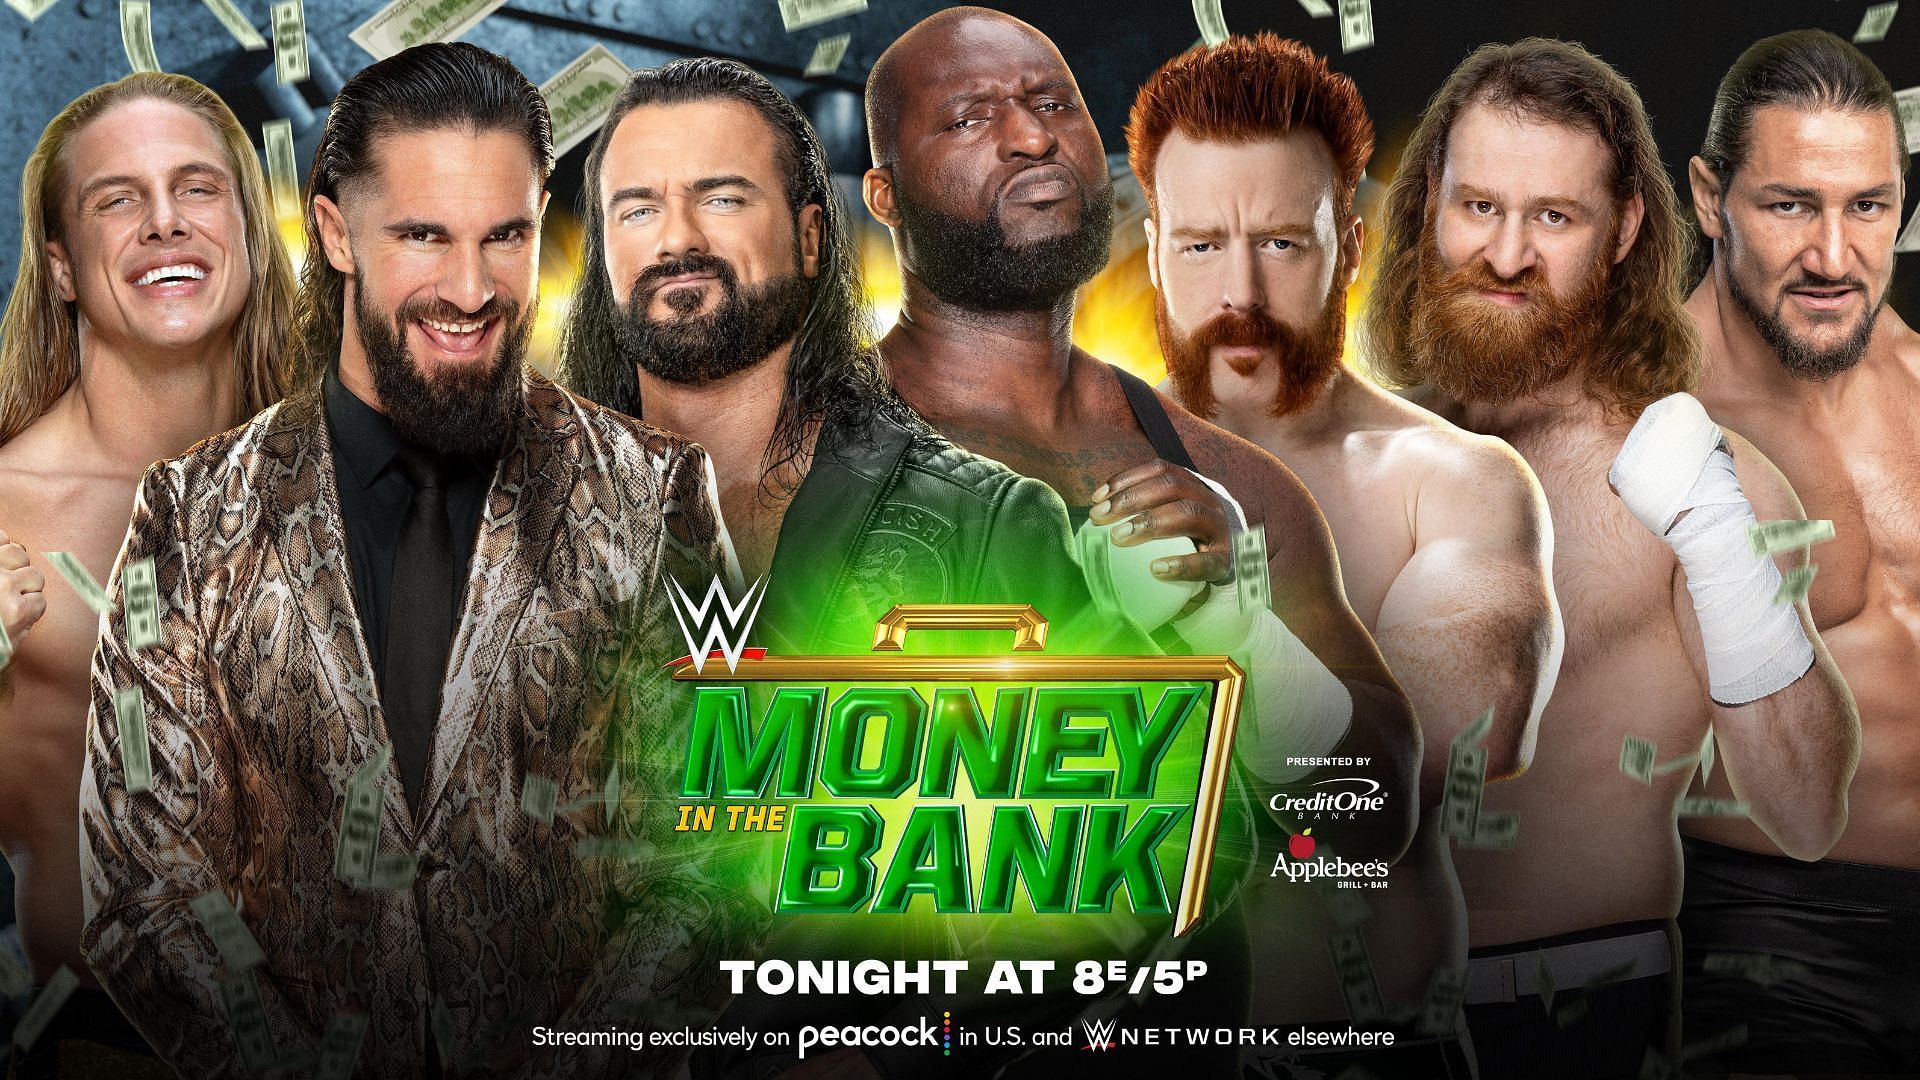 WWE Money in the Bank looks to be a promising show